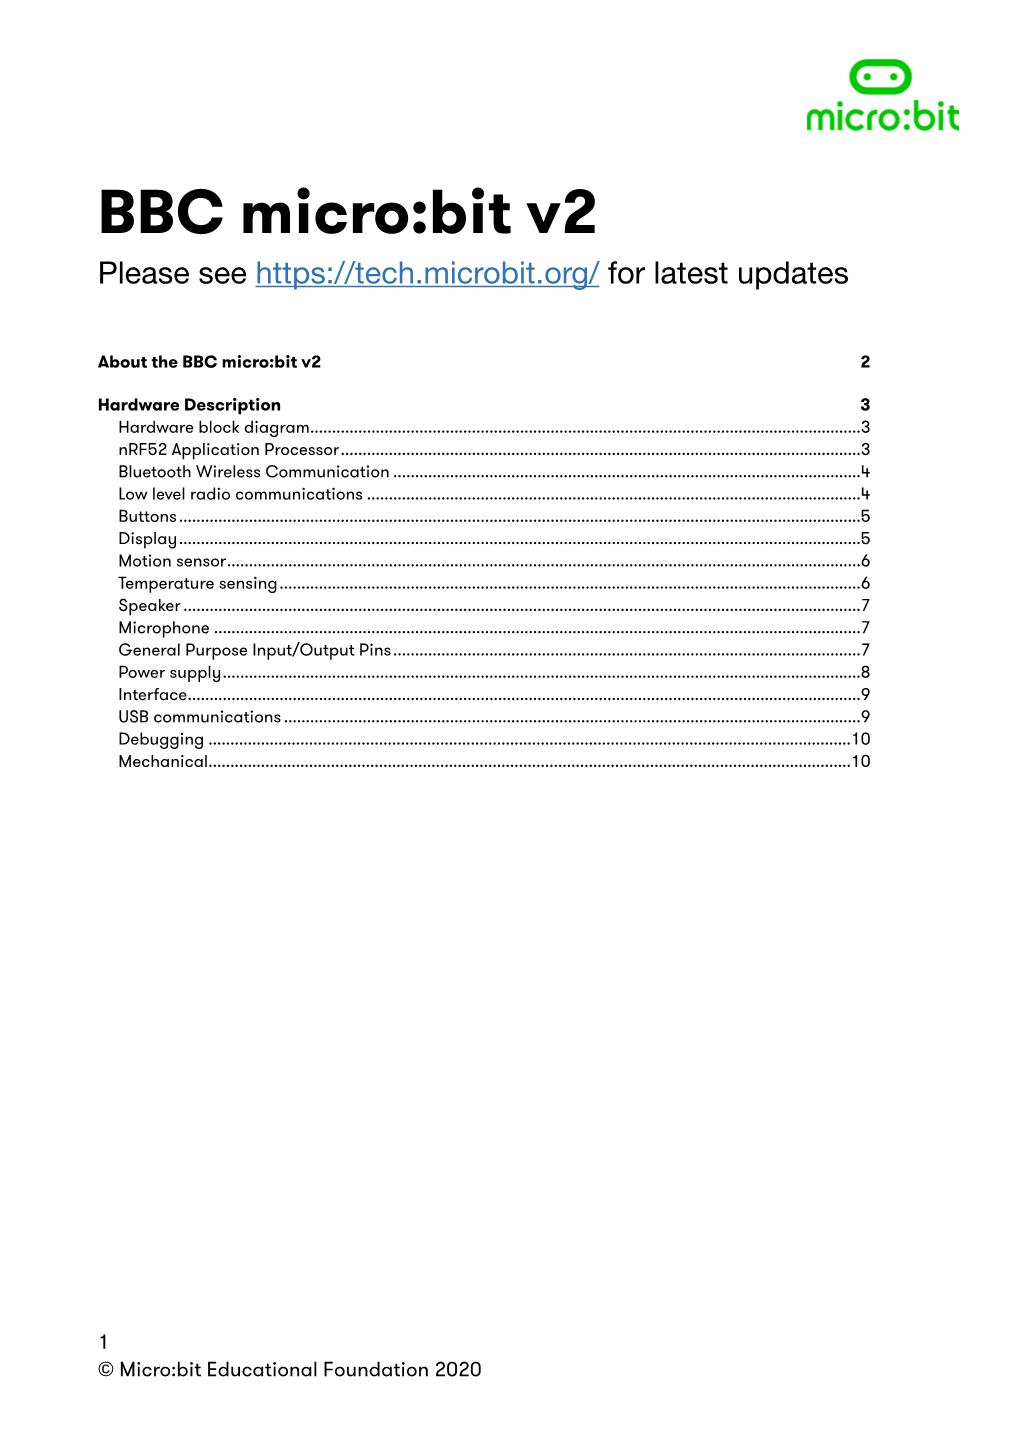 BBC Micro:Bit V2 Please See for Latest Updates